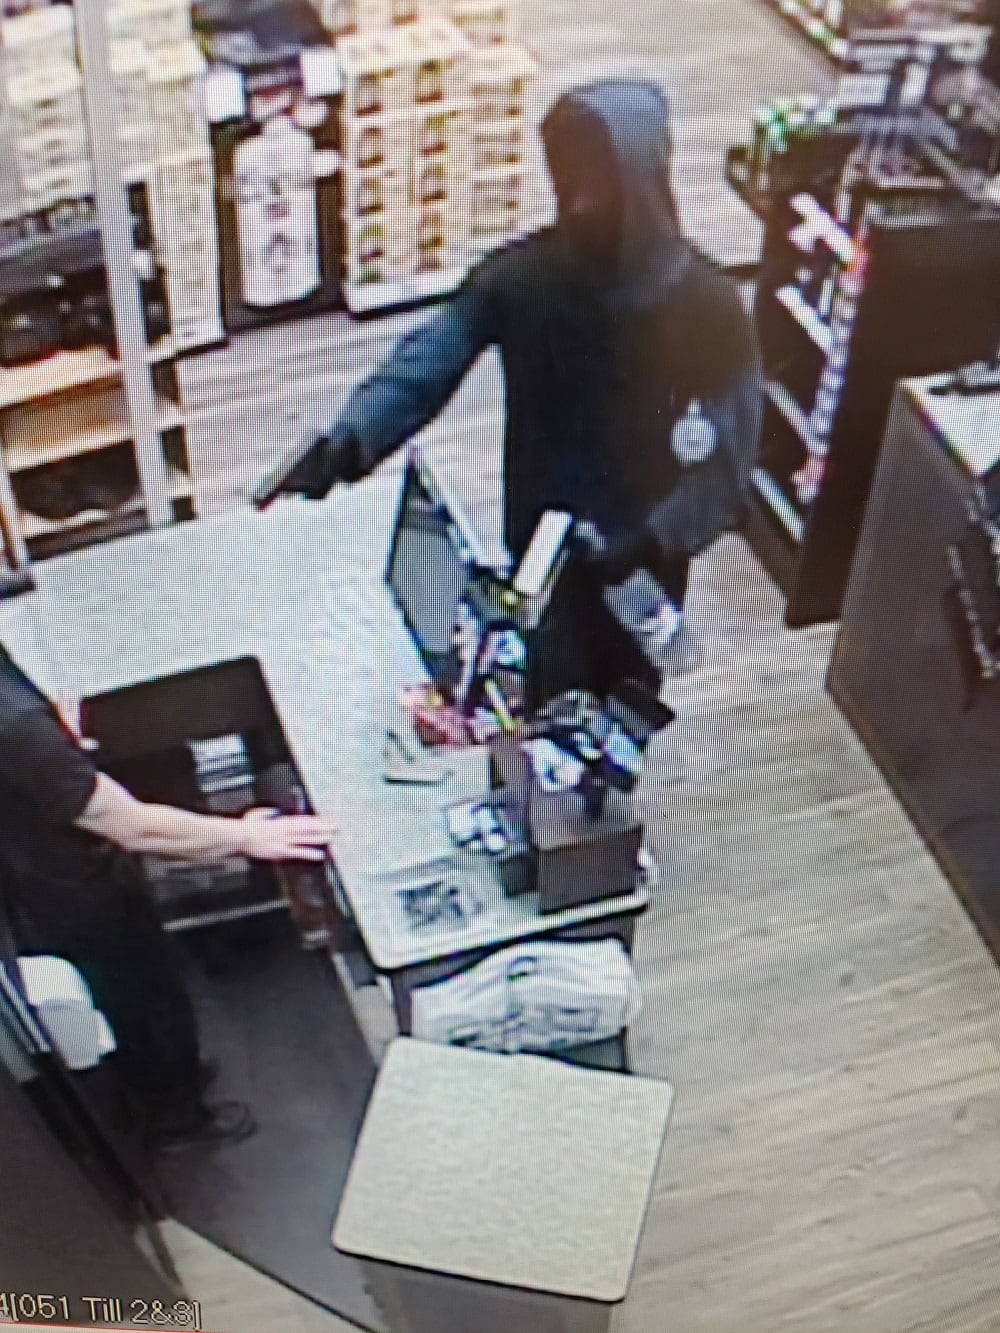 Armed suspect robs Trail liquor store at gunpoint